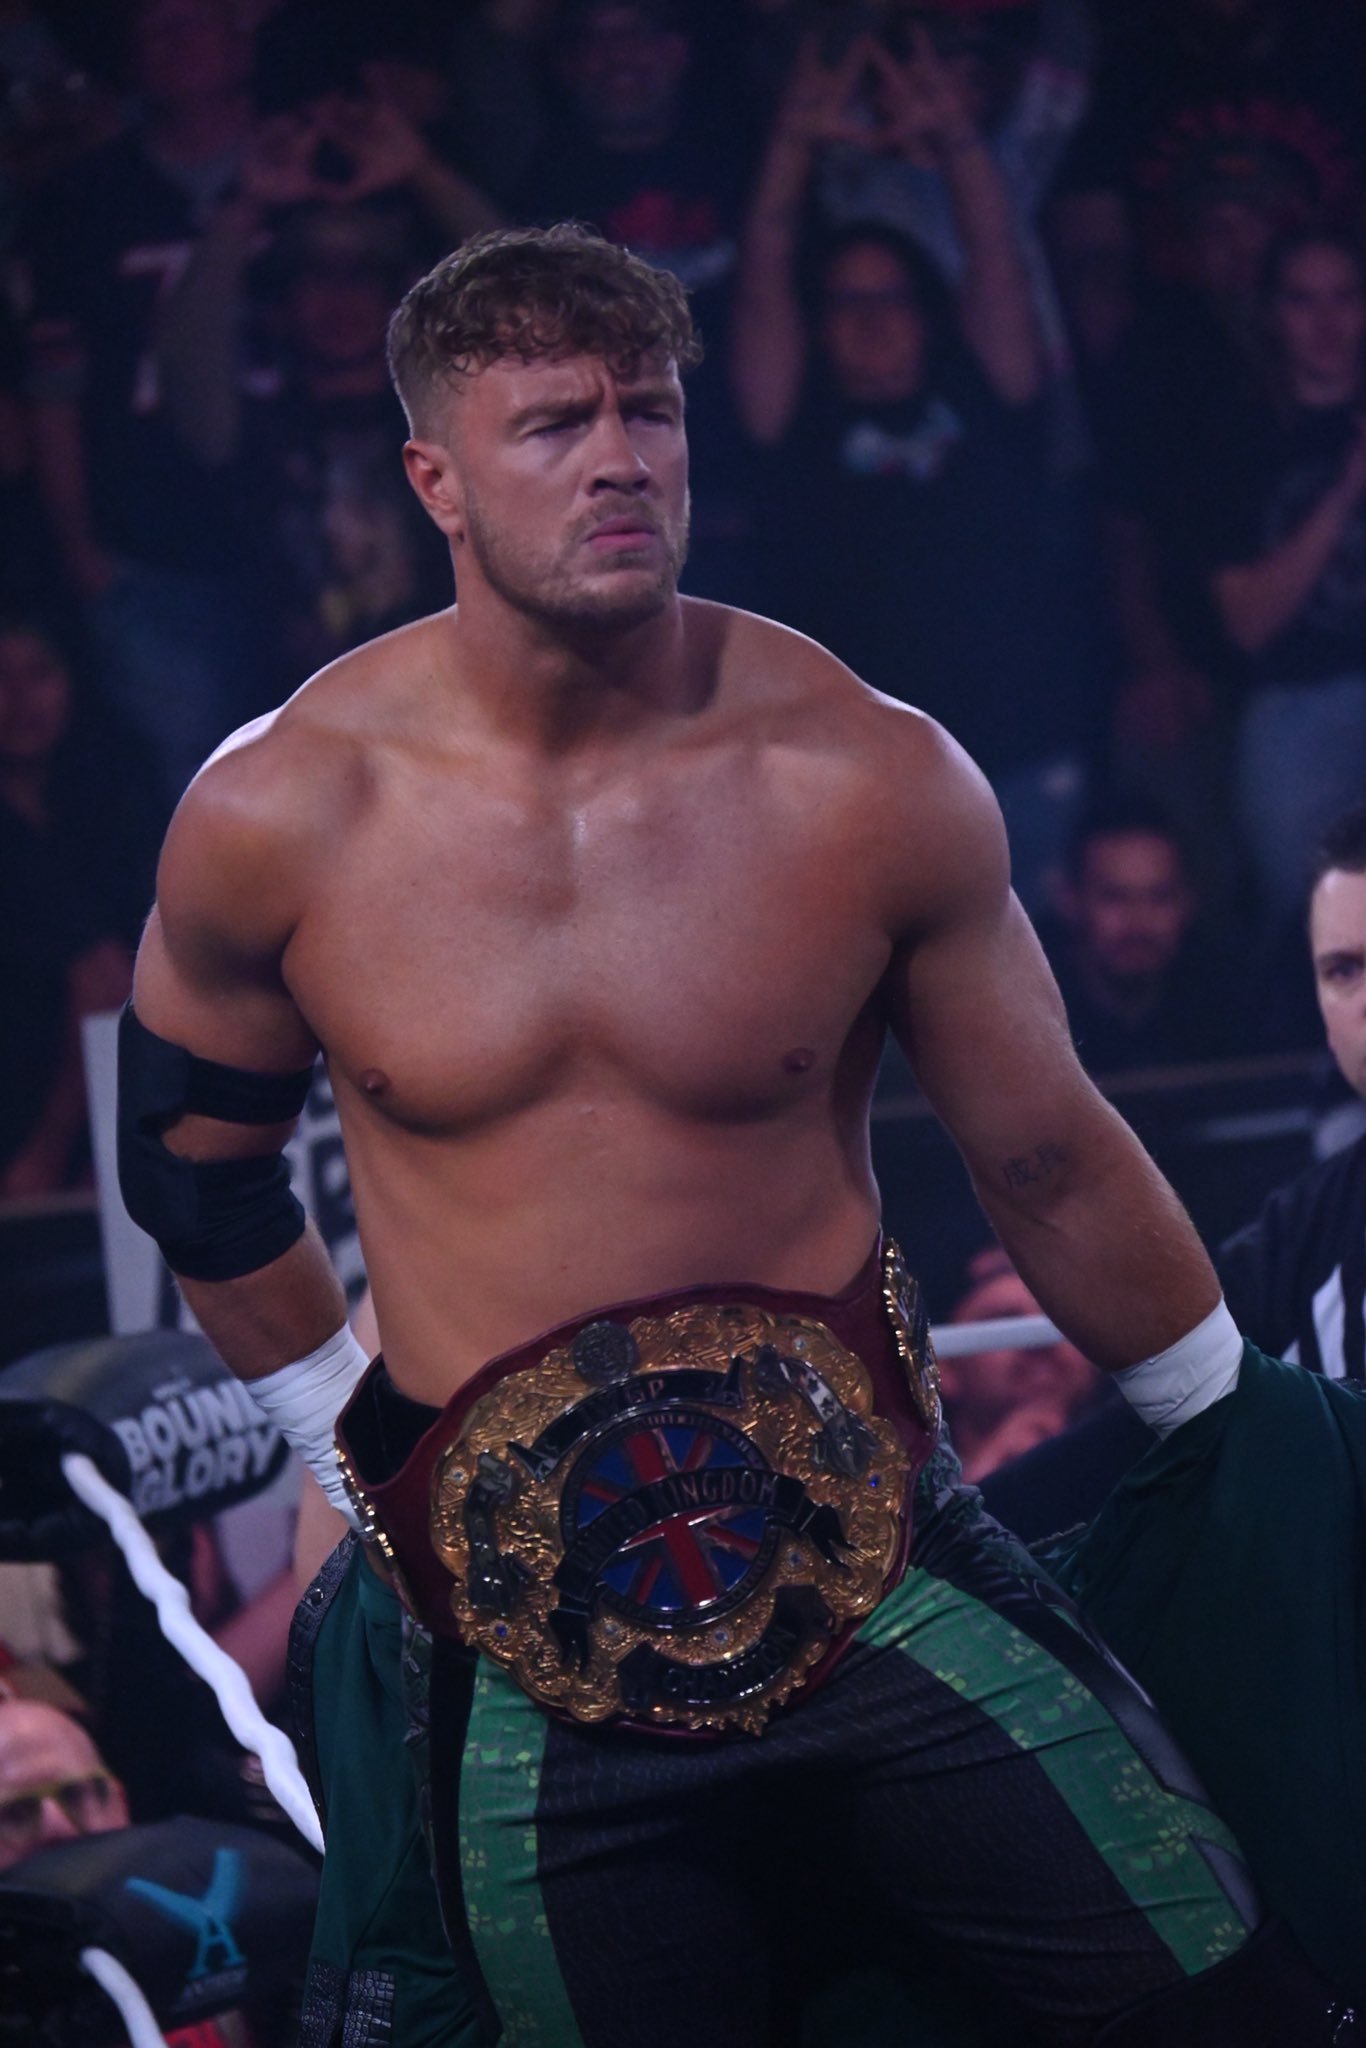 Will Ospreay, one of the free agents that stands out the most